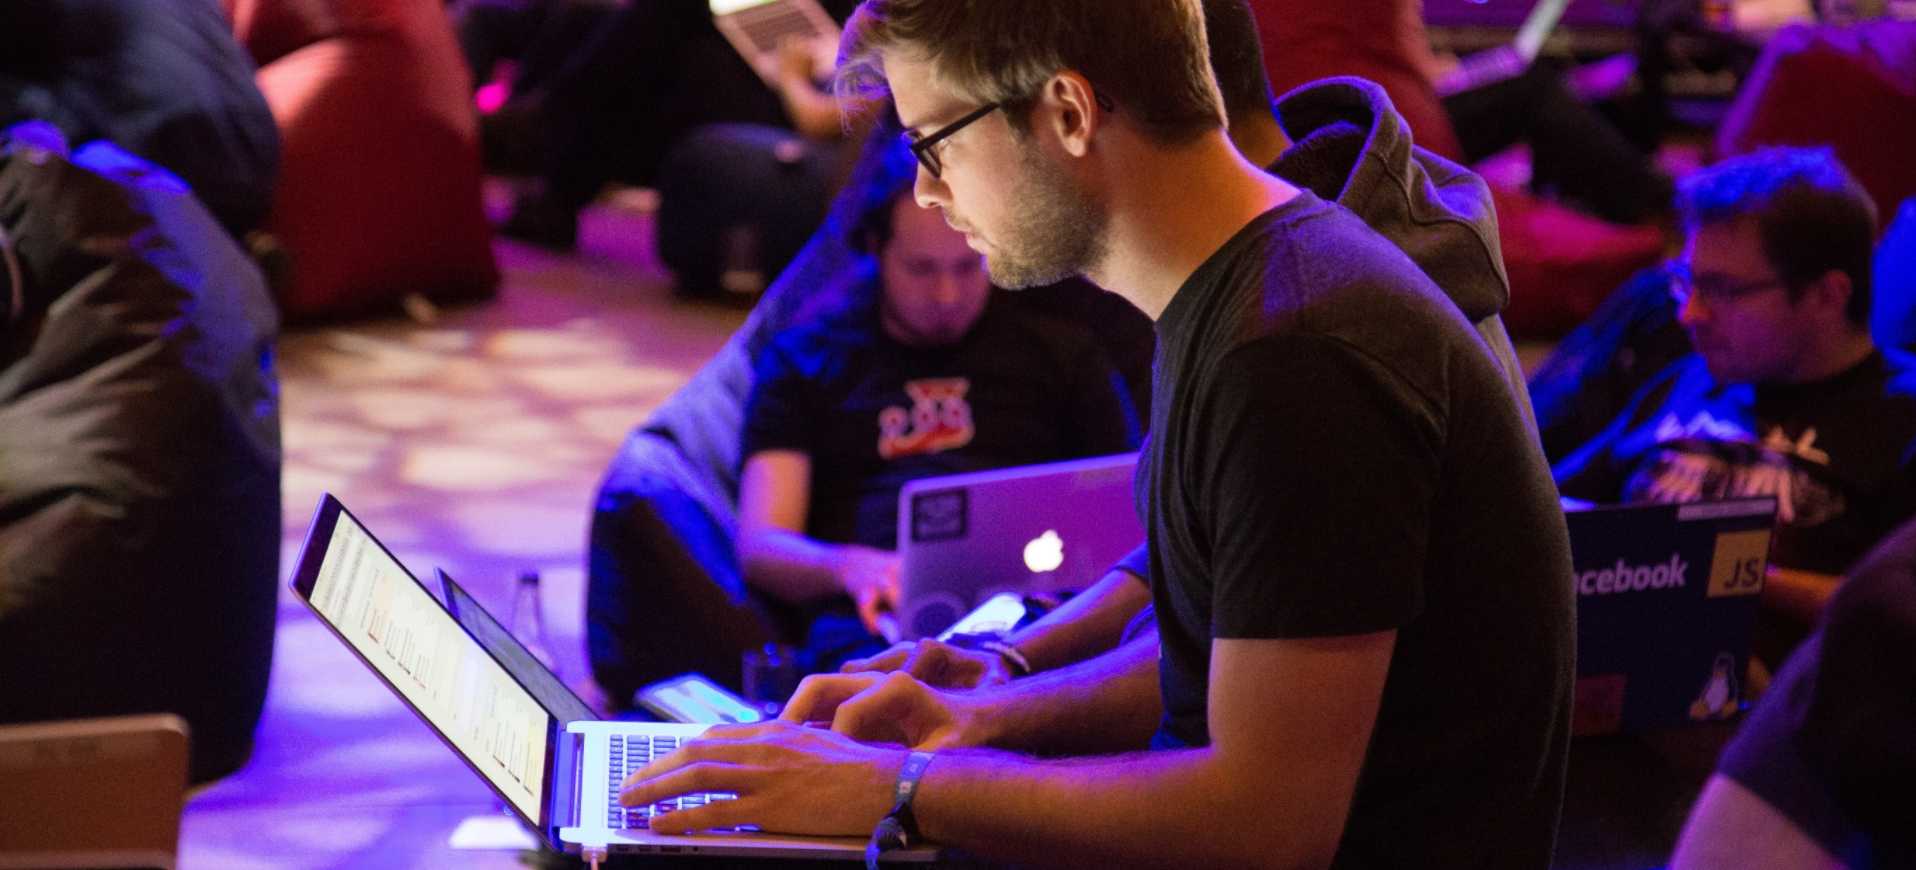 A man with glasses in a group of people on a laptop in a colorfully lit general session